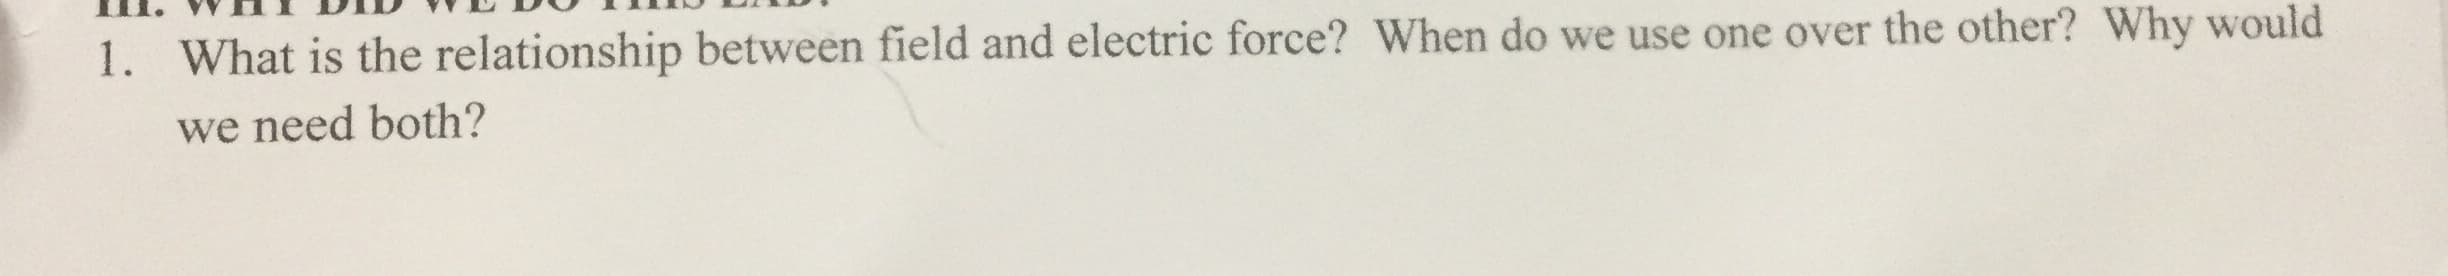 What is the relationship between field and electric force? When do we use one over the other? Why would
1.
we need both?
